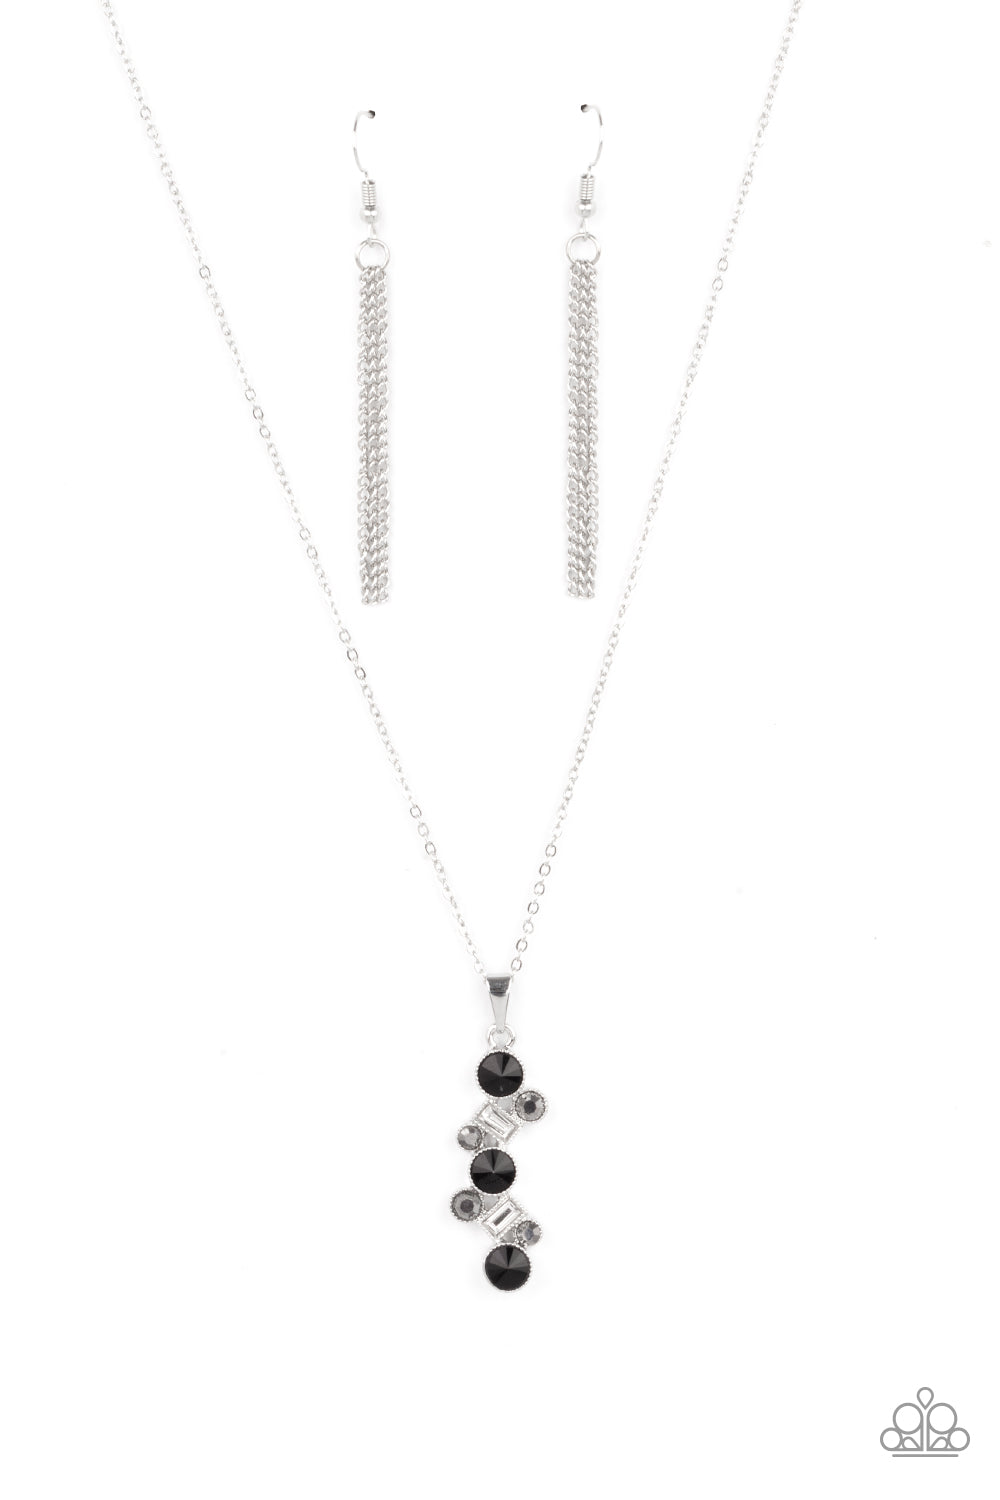 Classically Clustered - black - Paparazzi necklace – JewelryBlingThing